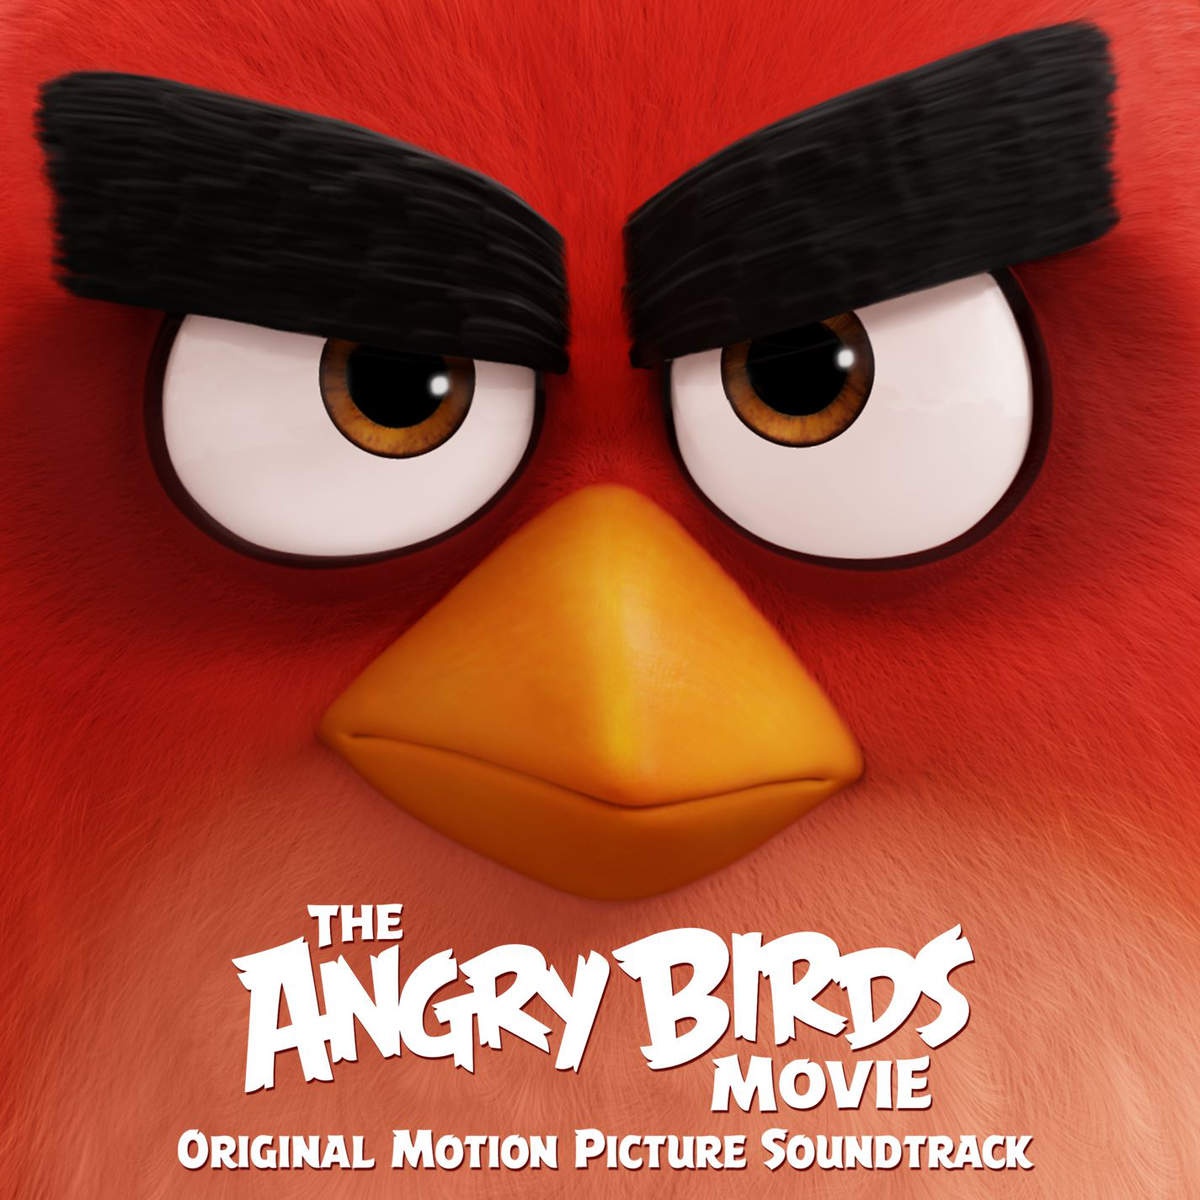 The Angry Birds Movie Score Medley